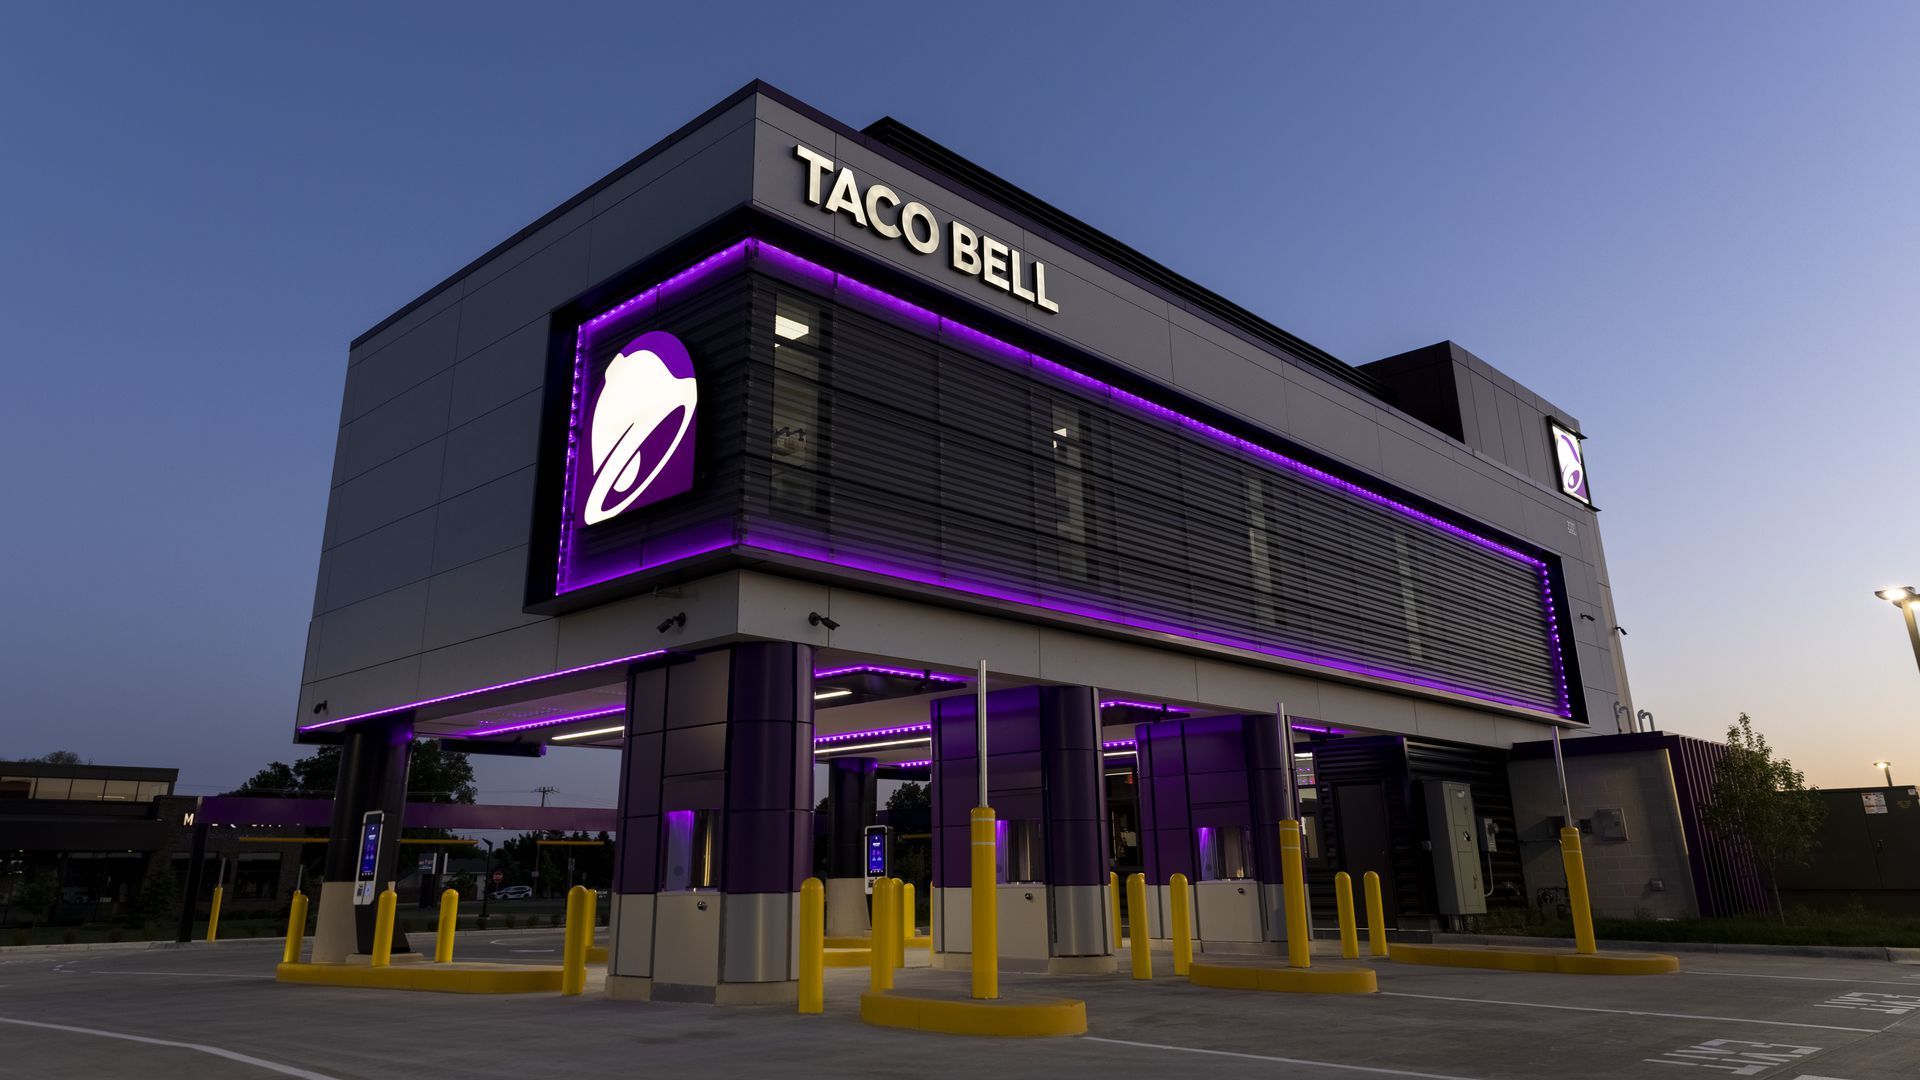 Taco Bell's new 